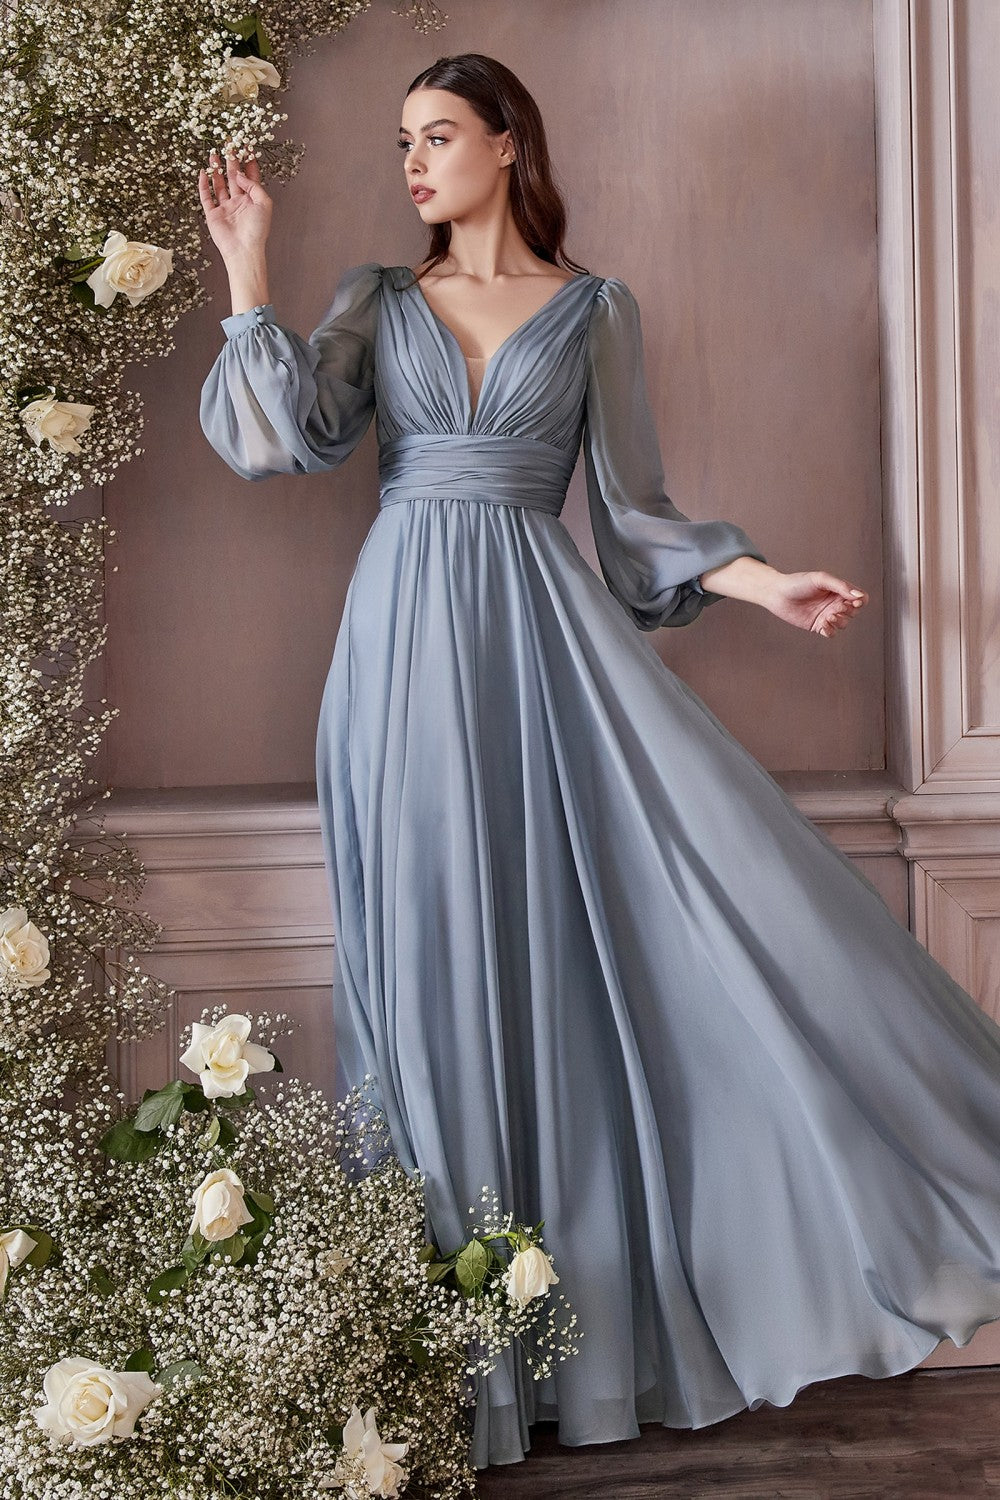 Cinderella Divine CD0192 LONG SLEEVE CHIFFON DRESS - Special Occasion/